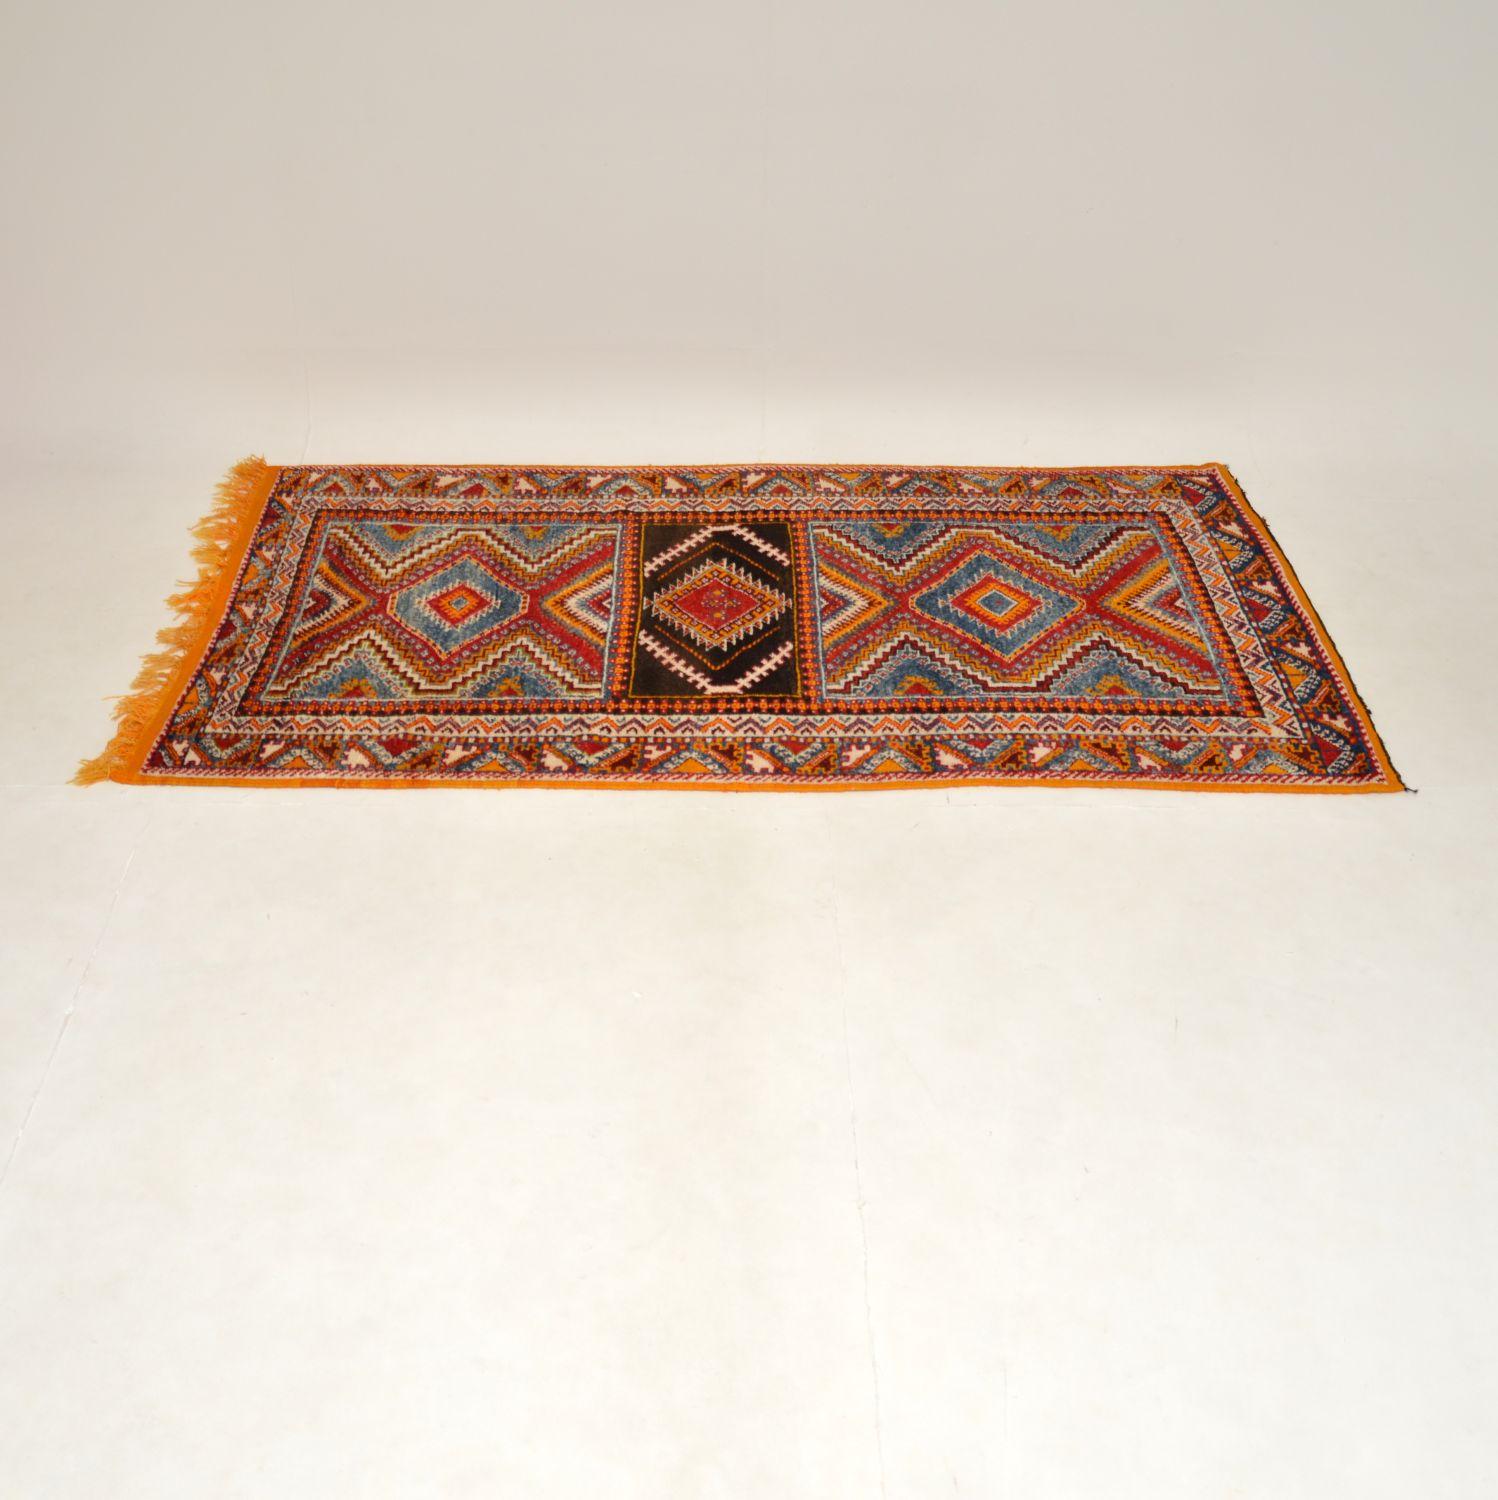 A stunning and very well made large antique Turkish rug, dating from around the 1920’s, or earlier.

It has beautiful patterns and vibrant colours, this is a really gorgeous antique rug.

The condition is excellent, with only some extremely minor